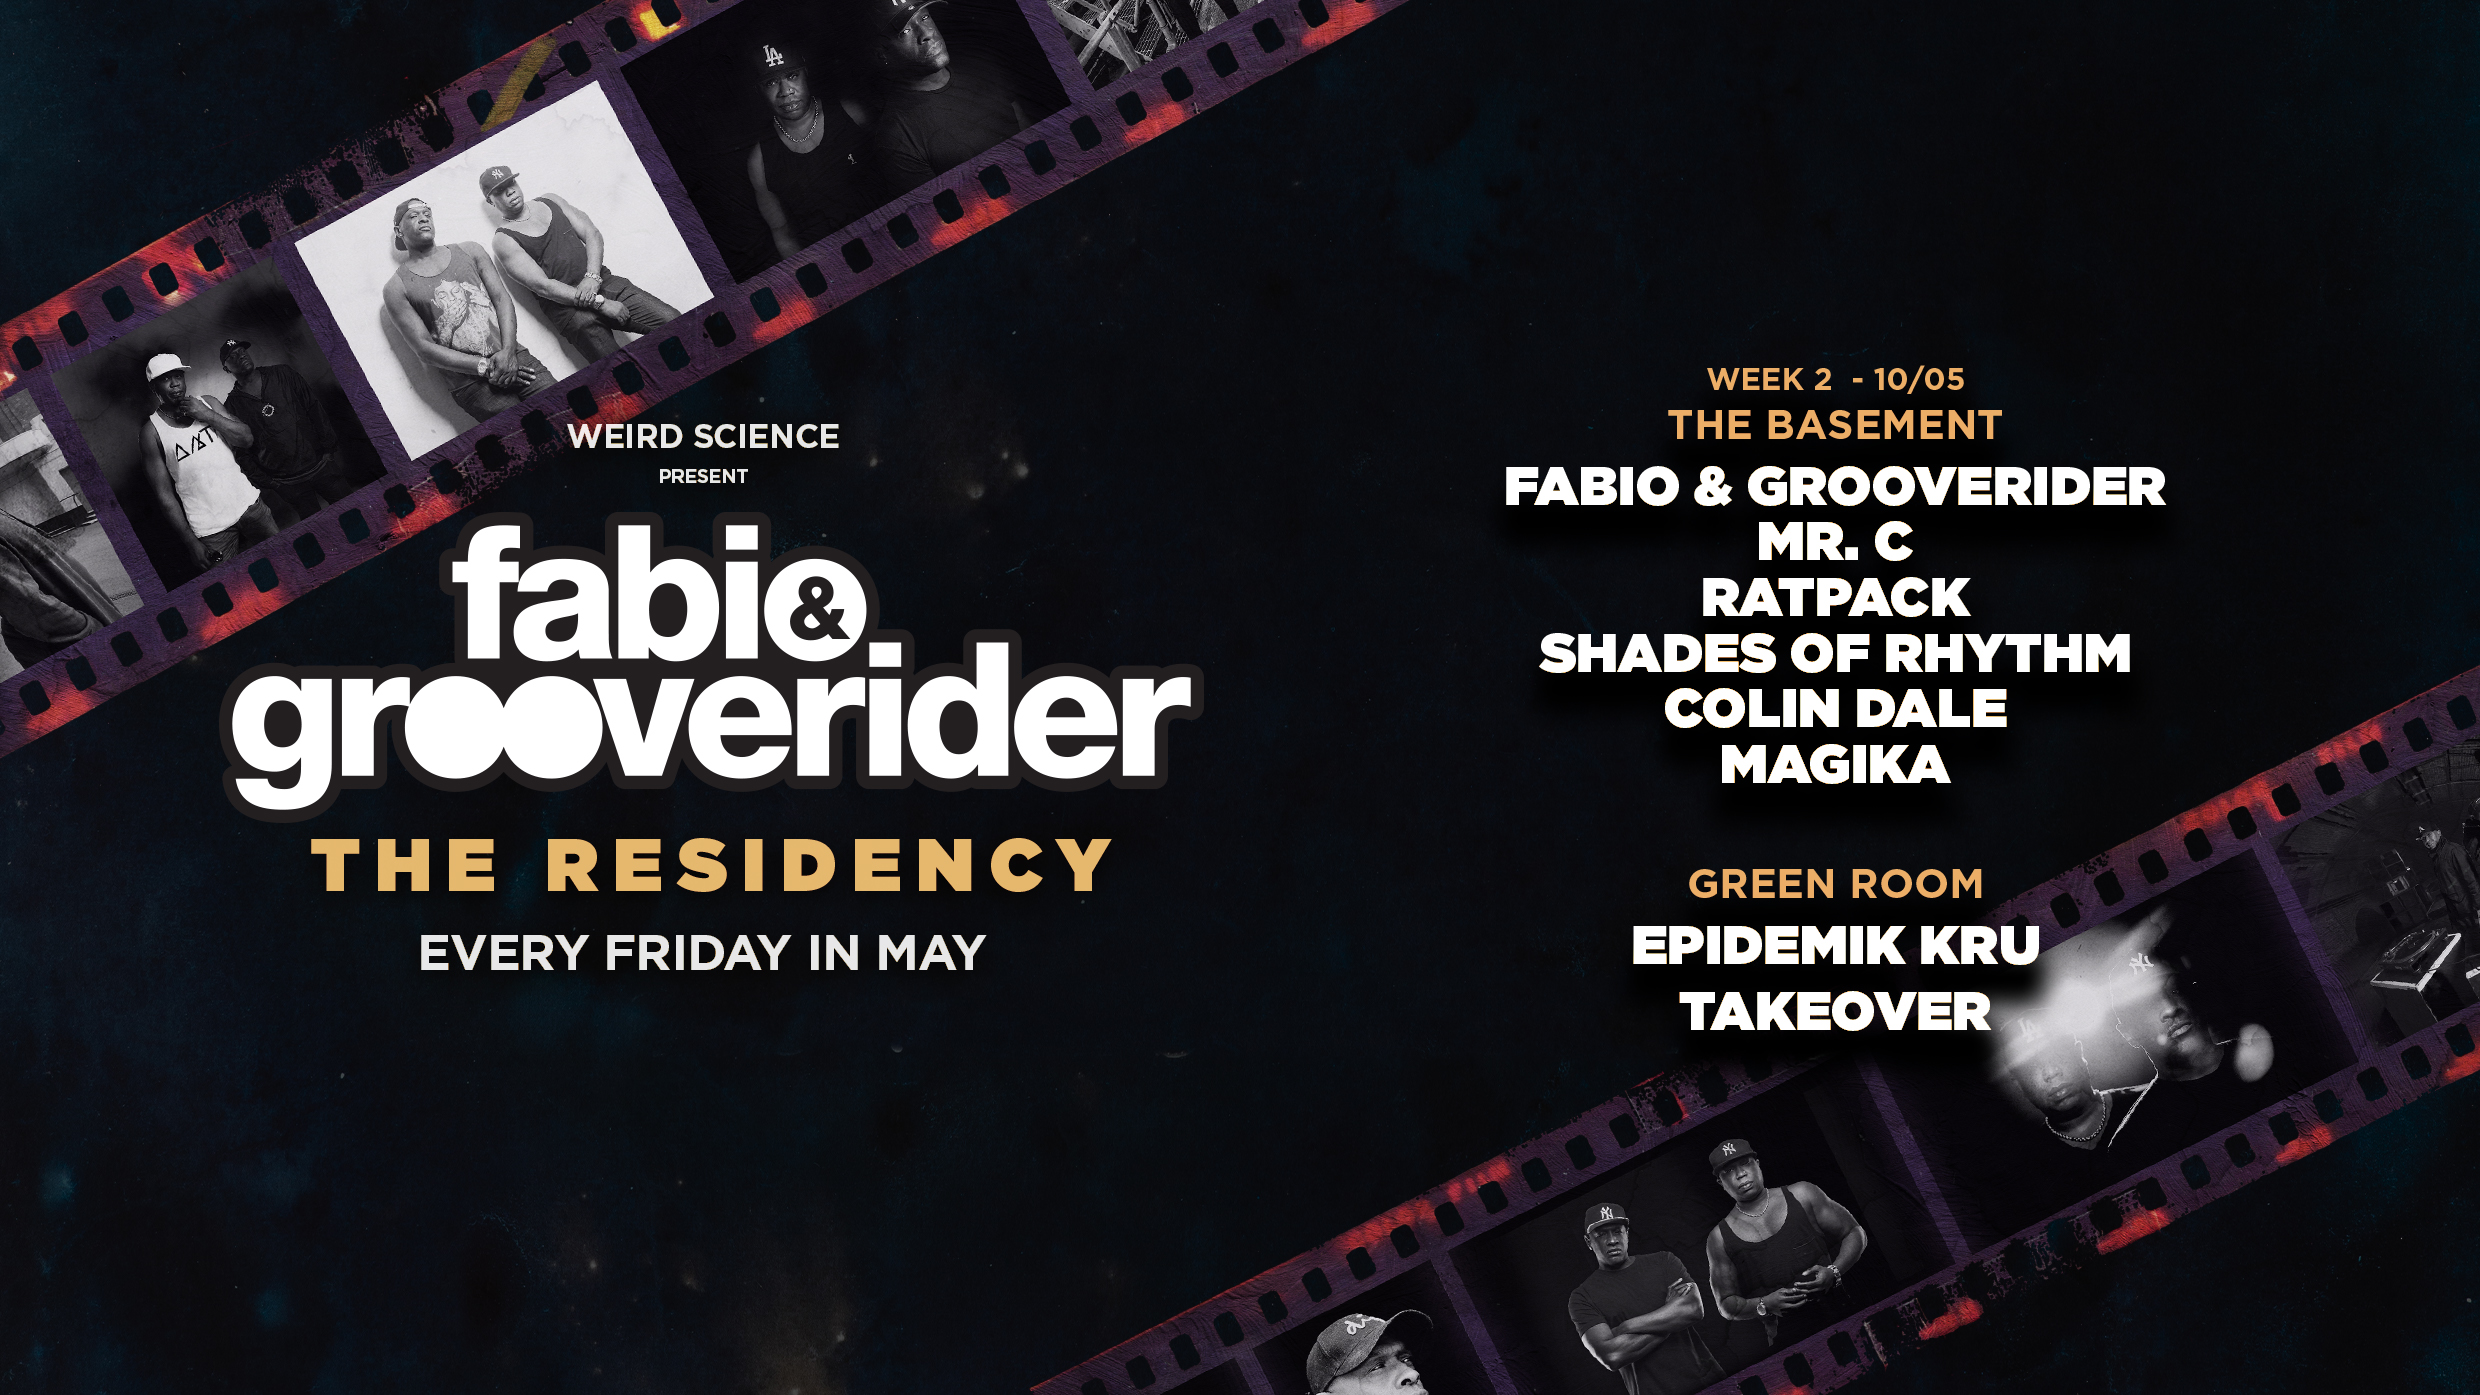 The legendary Fabio & Grooverider are taking over XOYO London EVERY Friday in May! See you there!